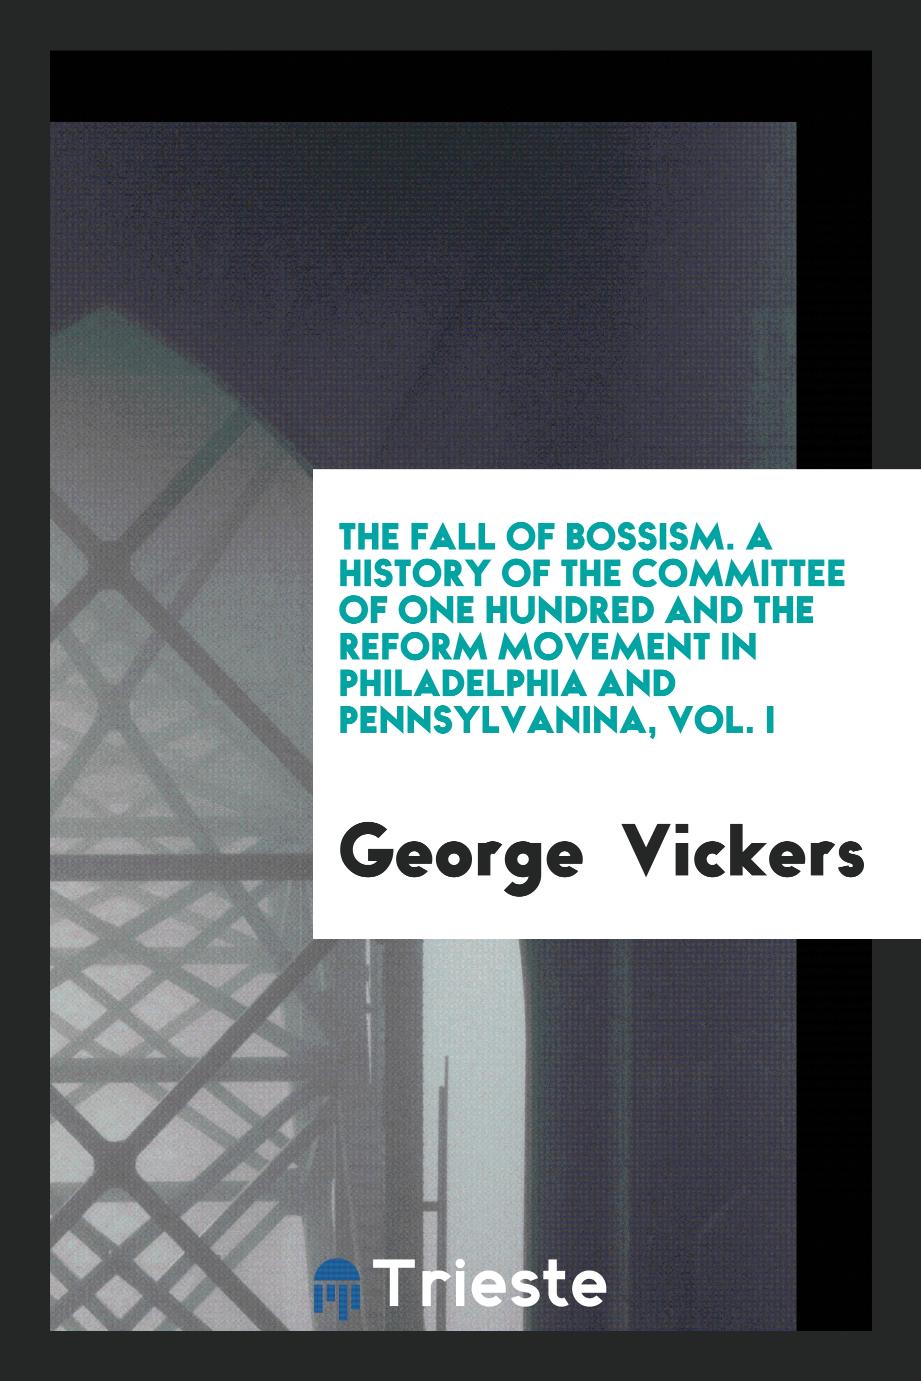 The fall of bossism. A history of the Committee of one hundred and the reform movement in Philadelphia and Pennsylvanina, Vol. I